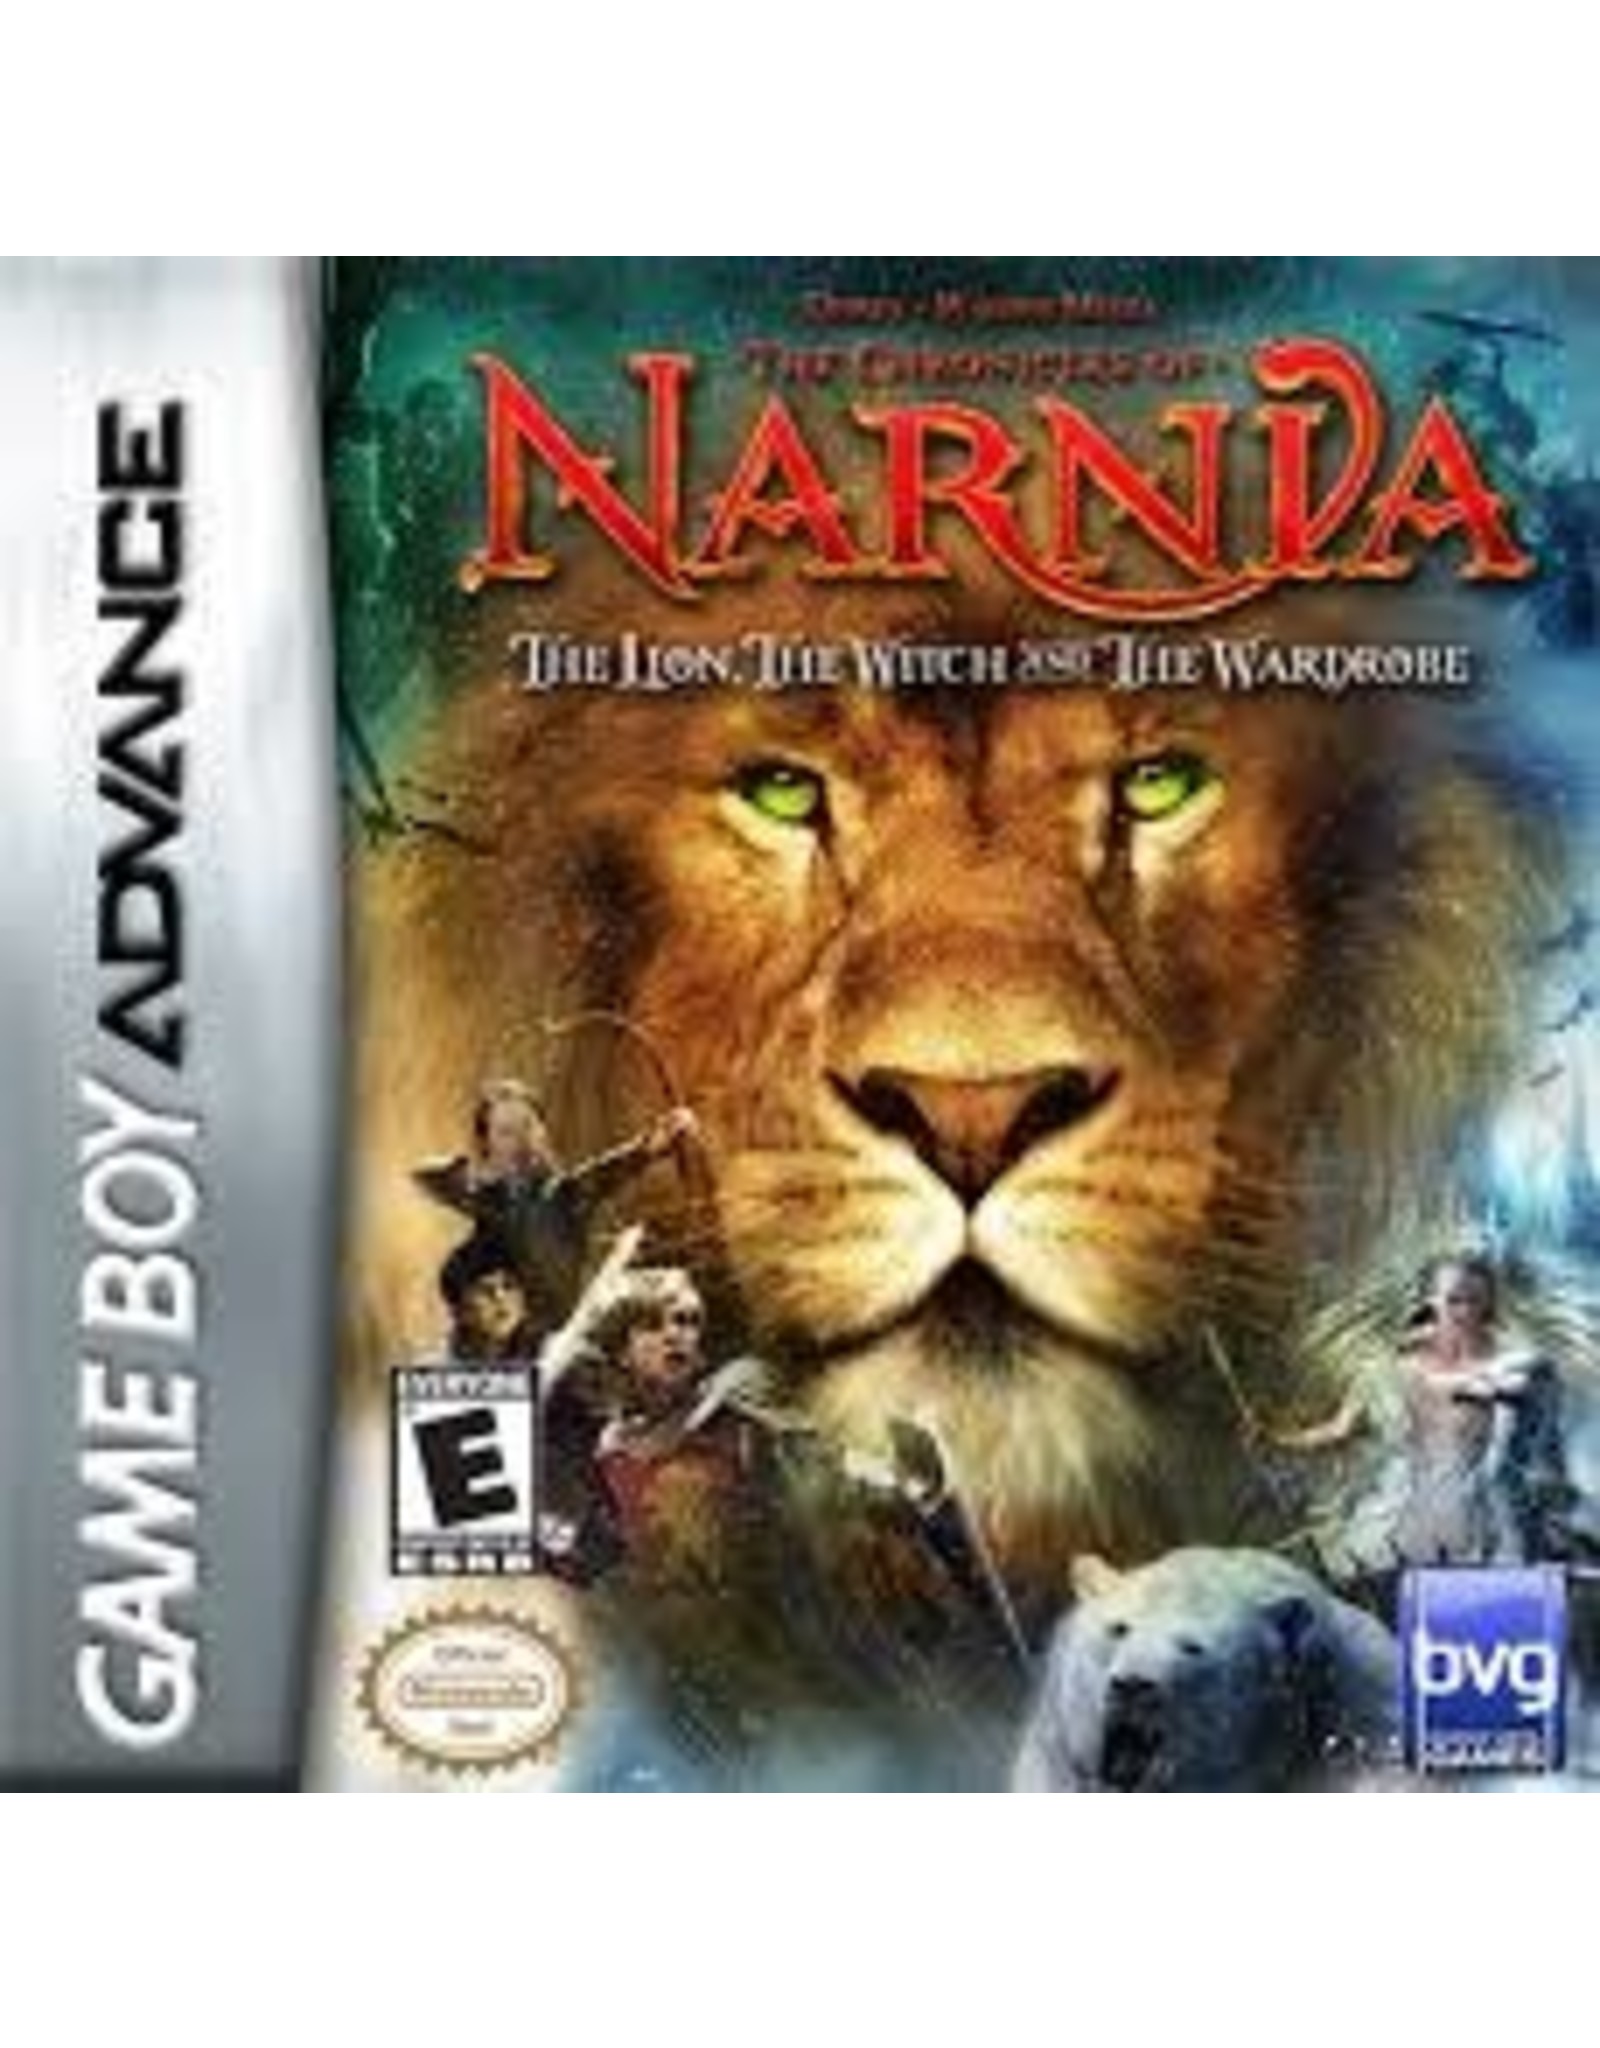 Game Boy Advance Chronicles of Narnia Lion Witch and the Wardrobe (Used, Cart Only)